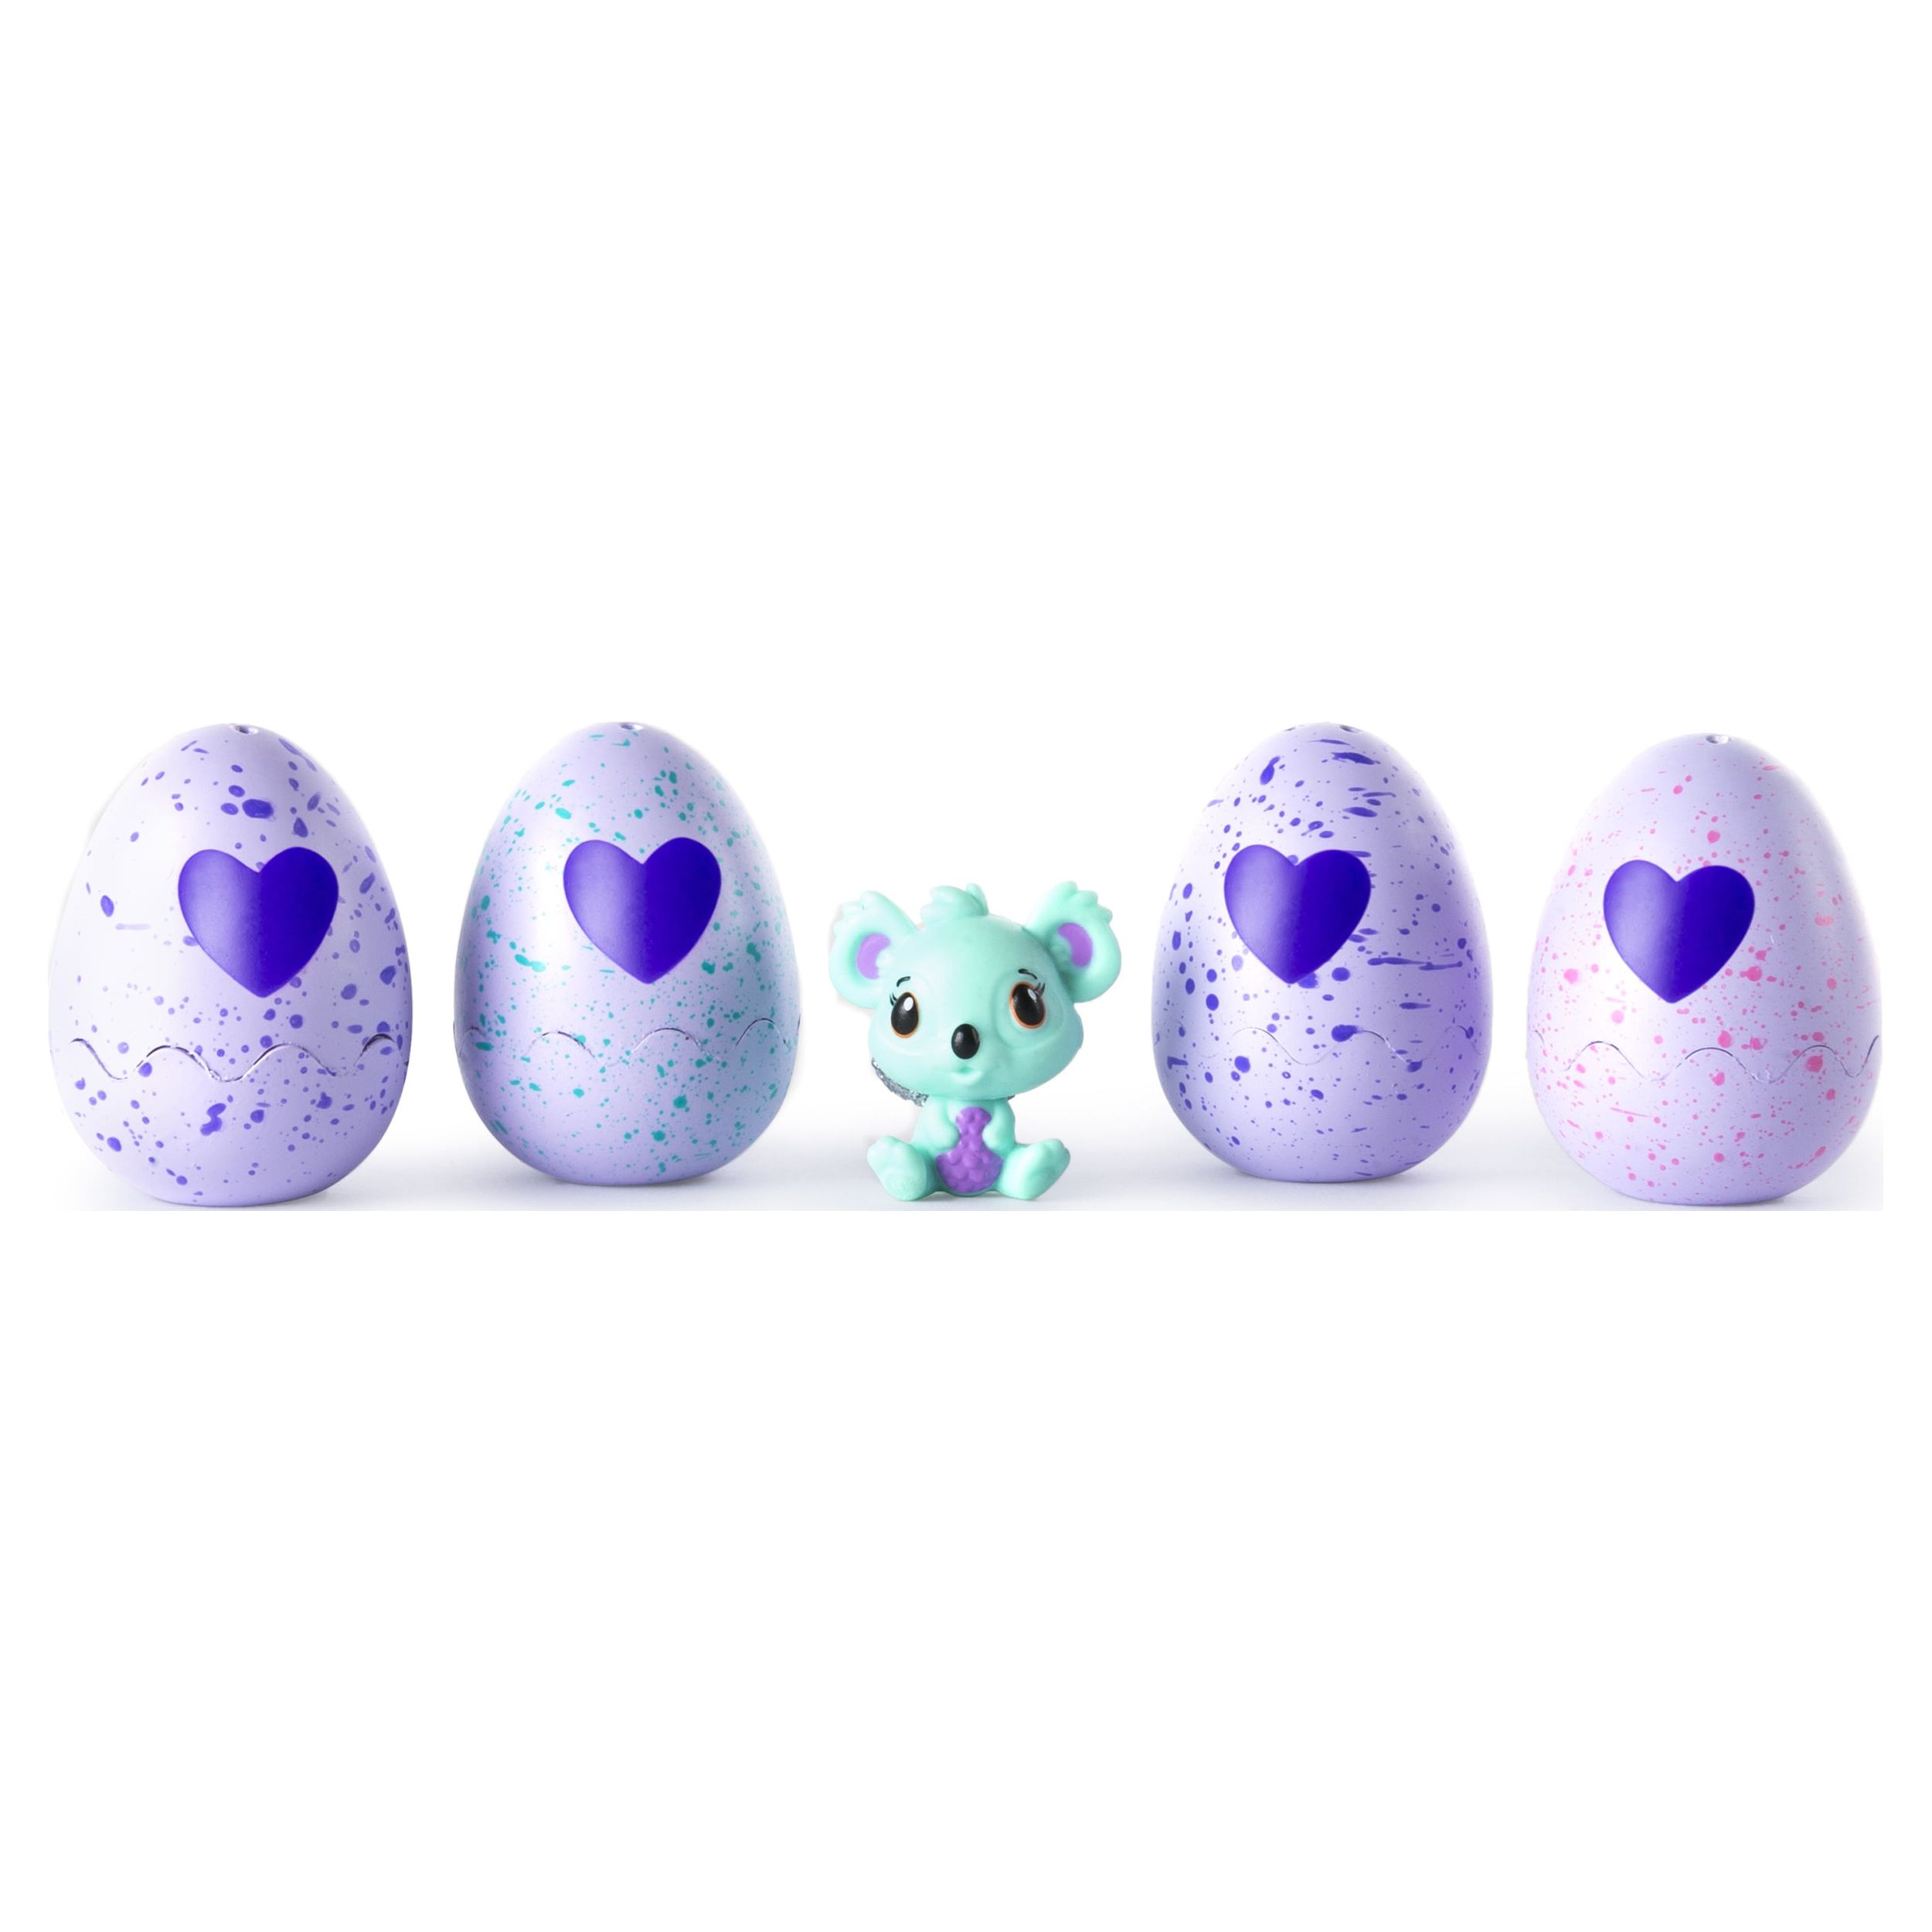 Hatchimals, CollEGGtibles, 4 Pack + Bonus (Styles & Colors May Vary) by Spin Master - Electronic Pets - image 7 of 14